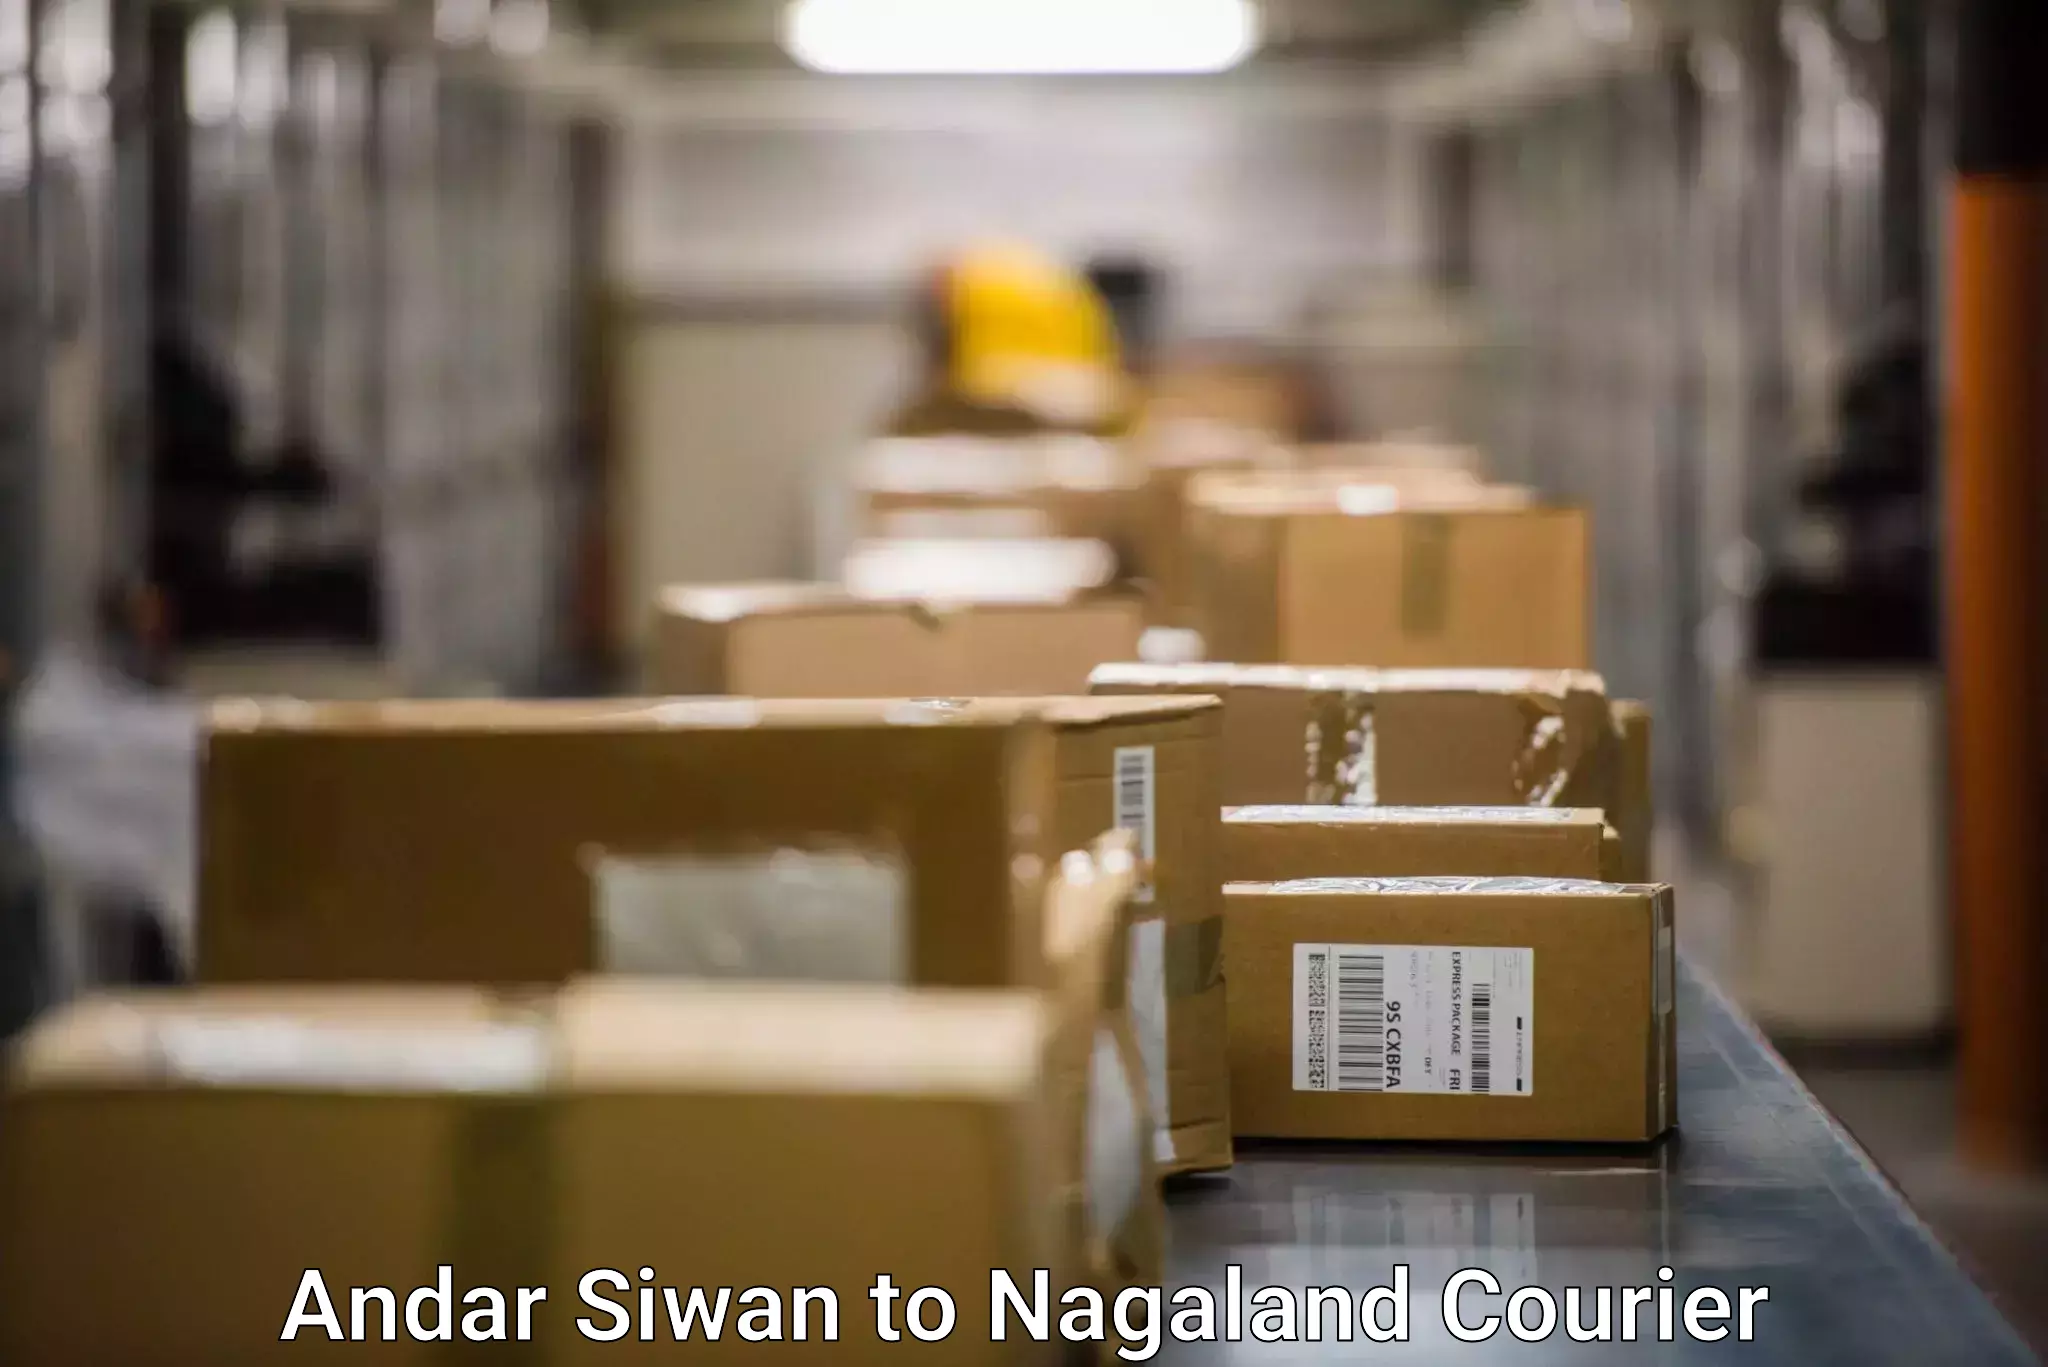 Efficient order fulfillment Andar Siwan to Mon